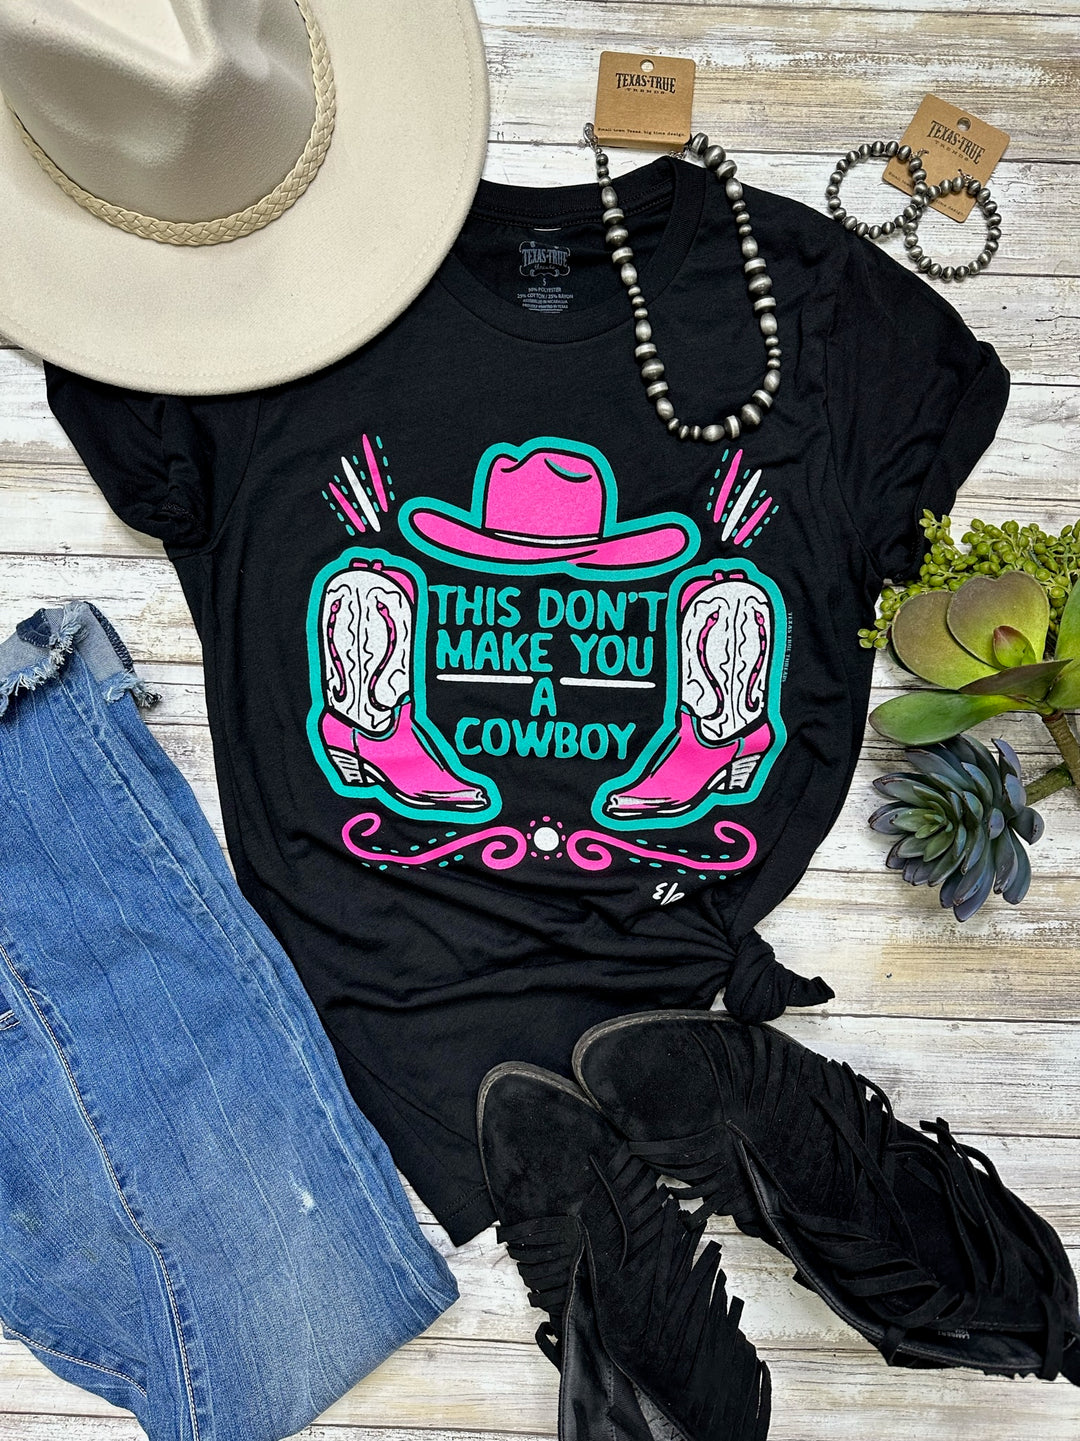 This Don't Make You a Cowboy Graphic Tee by Texas True Threads